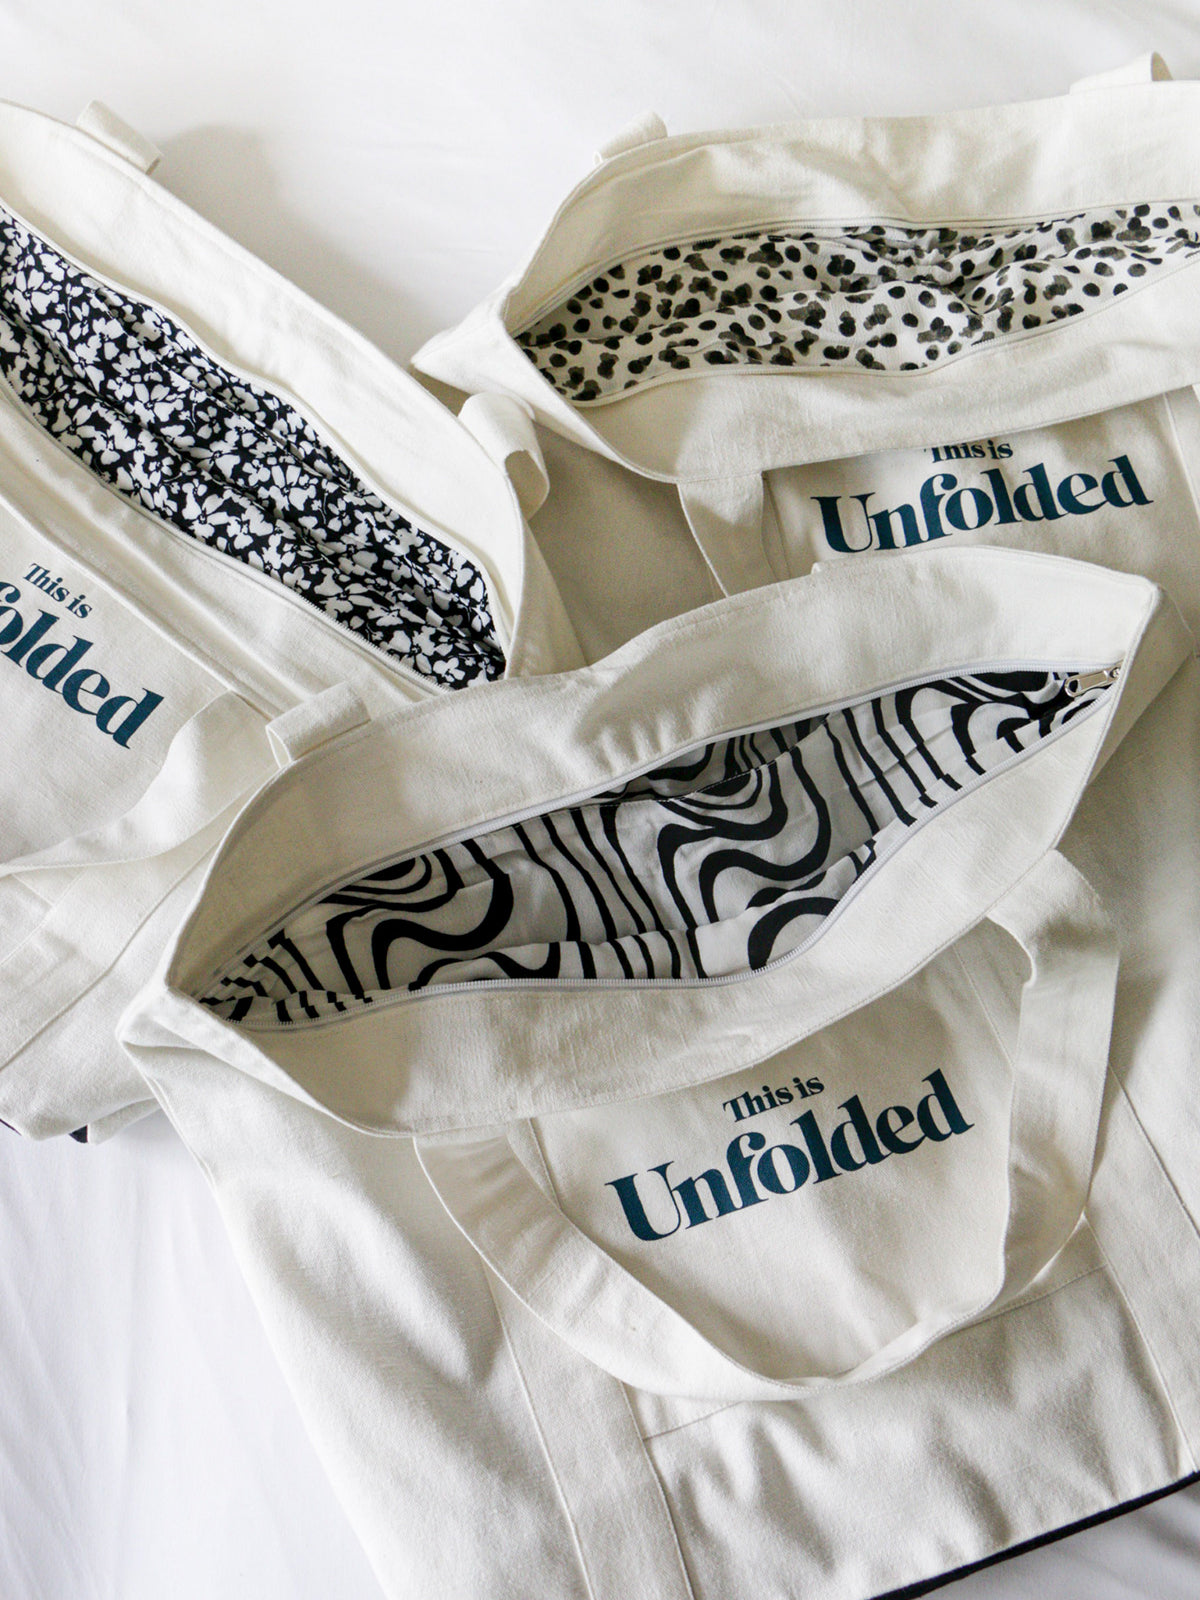 Three Joey bags are laid together with their individual linings displayed, pictured against a white backdrop. 